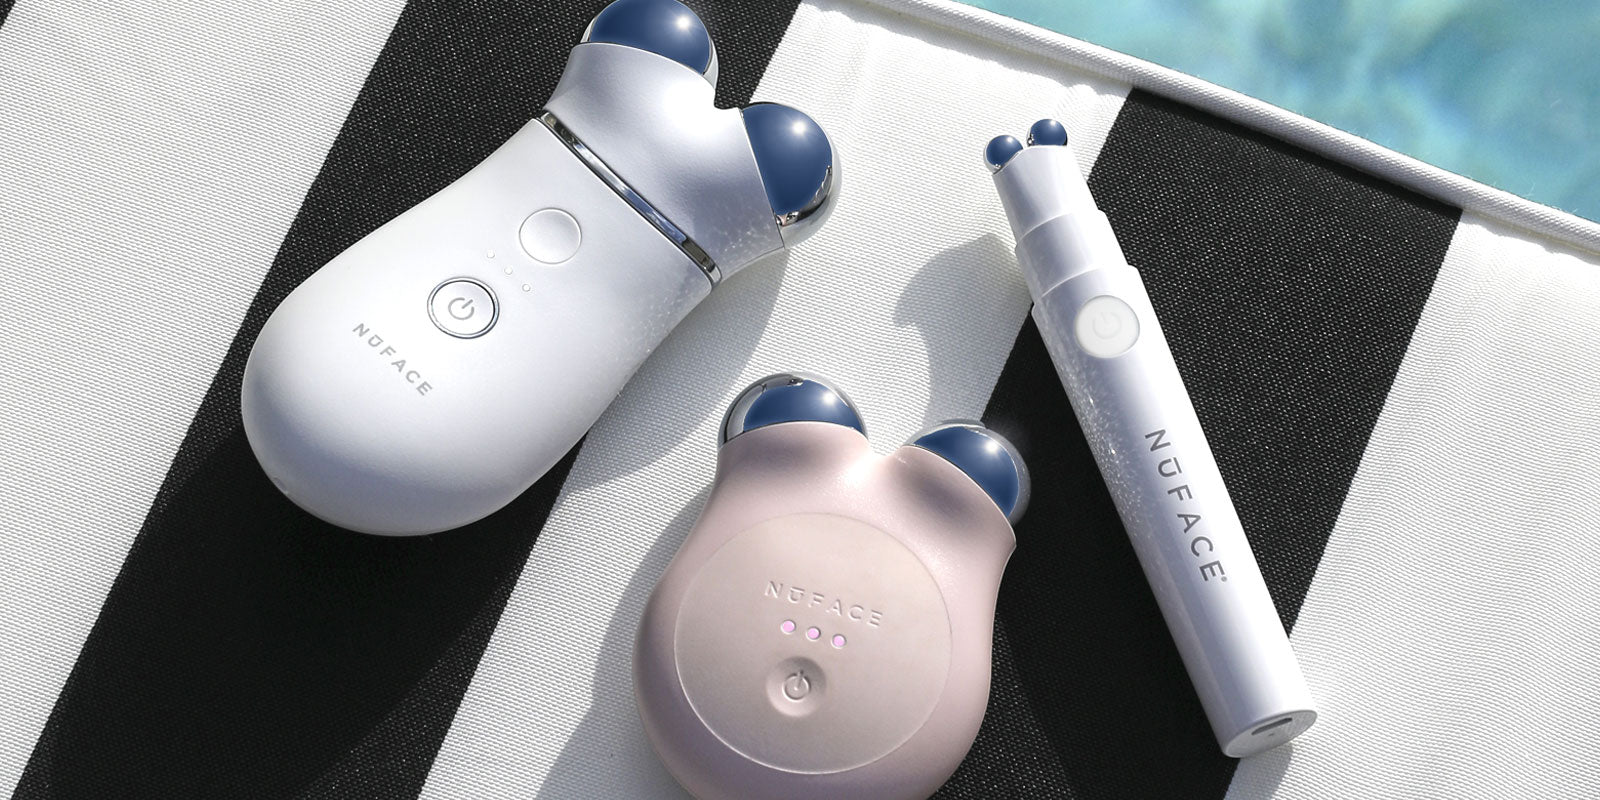 What's New in Skincare Technology?